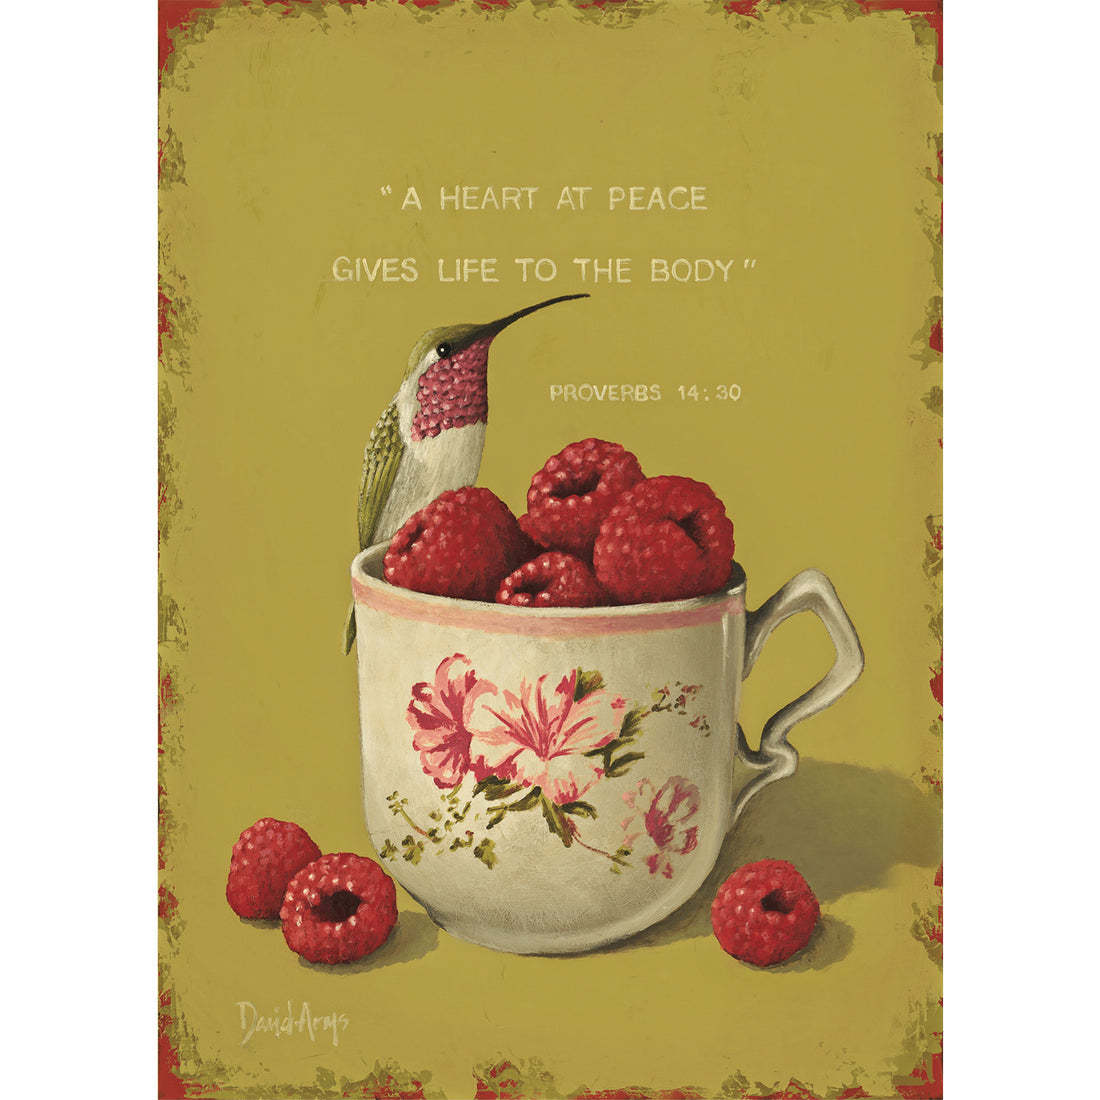 An illustration of a white, red and green hummingbird resting on the edge of a floral tea cup overflowing with red raspberries on an olive green background, with the Bible quote &quot;Proverbs 14:30&quot; printed in white above the bird.